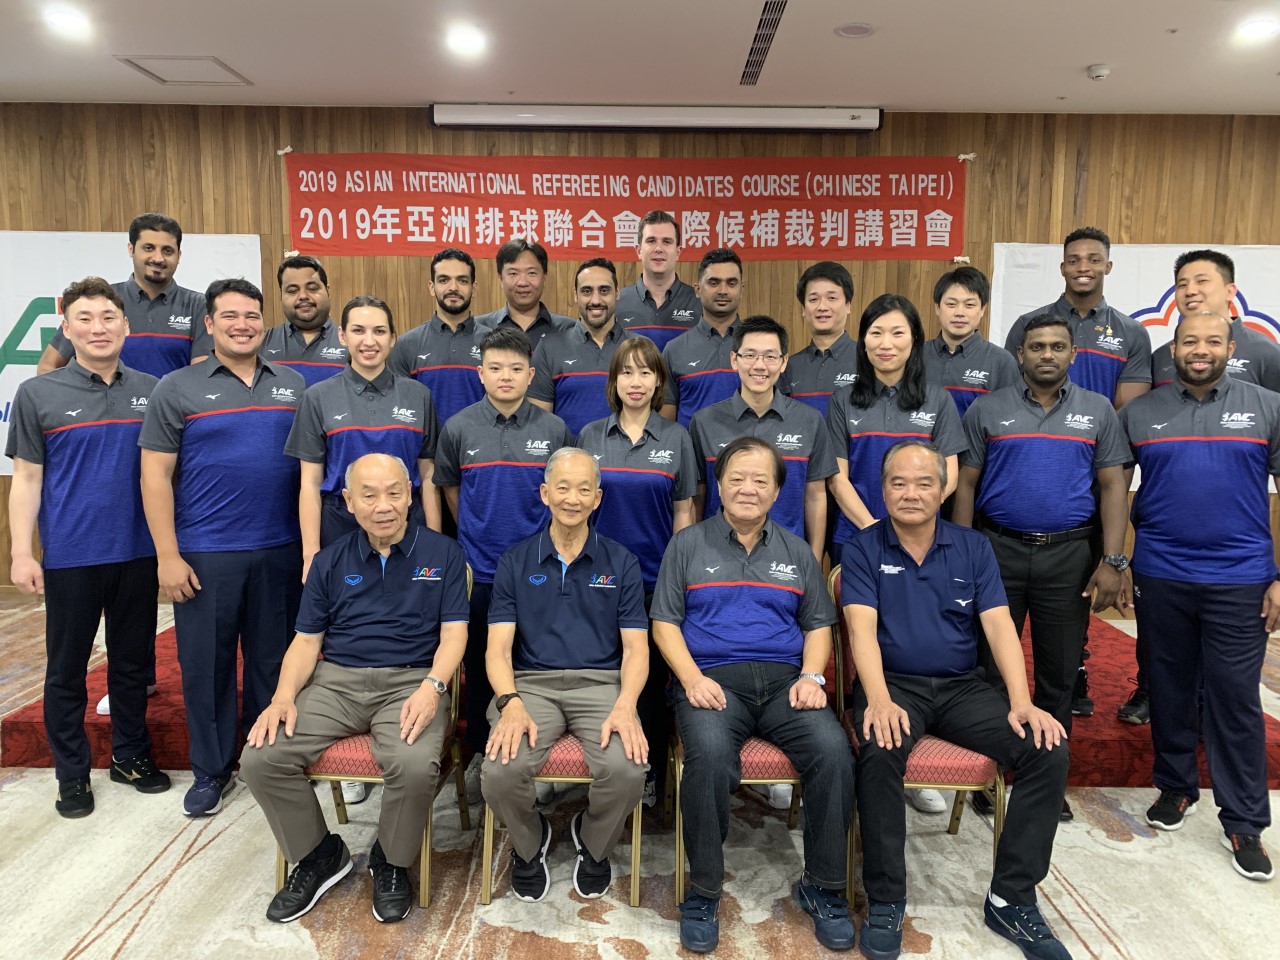 ASIAN INTERNATIONAL REFEREEING CANDIDATE COURSE GETS UNDER WAY IN CHINESE TAIPEI